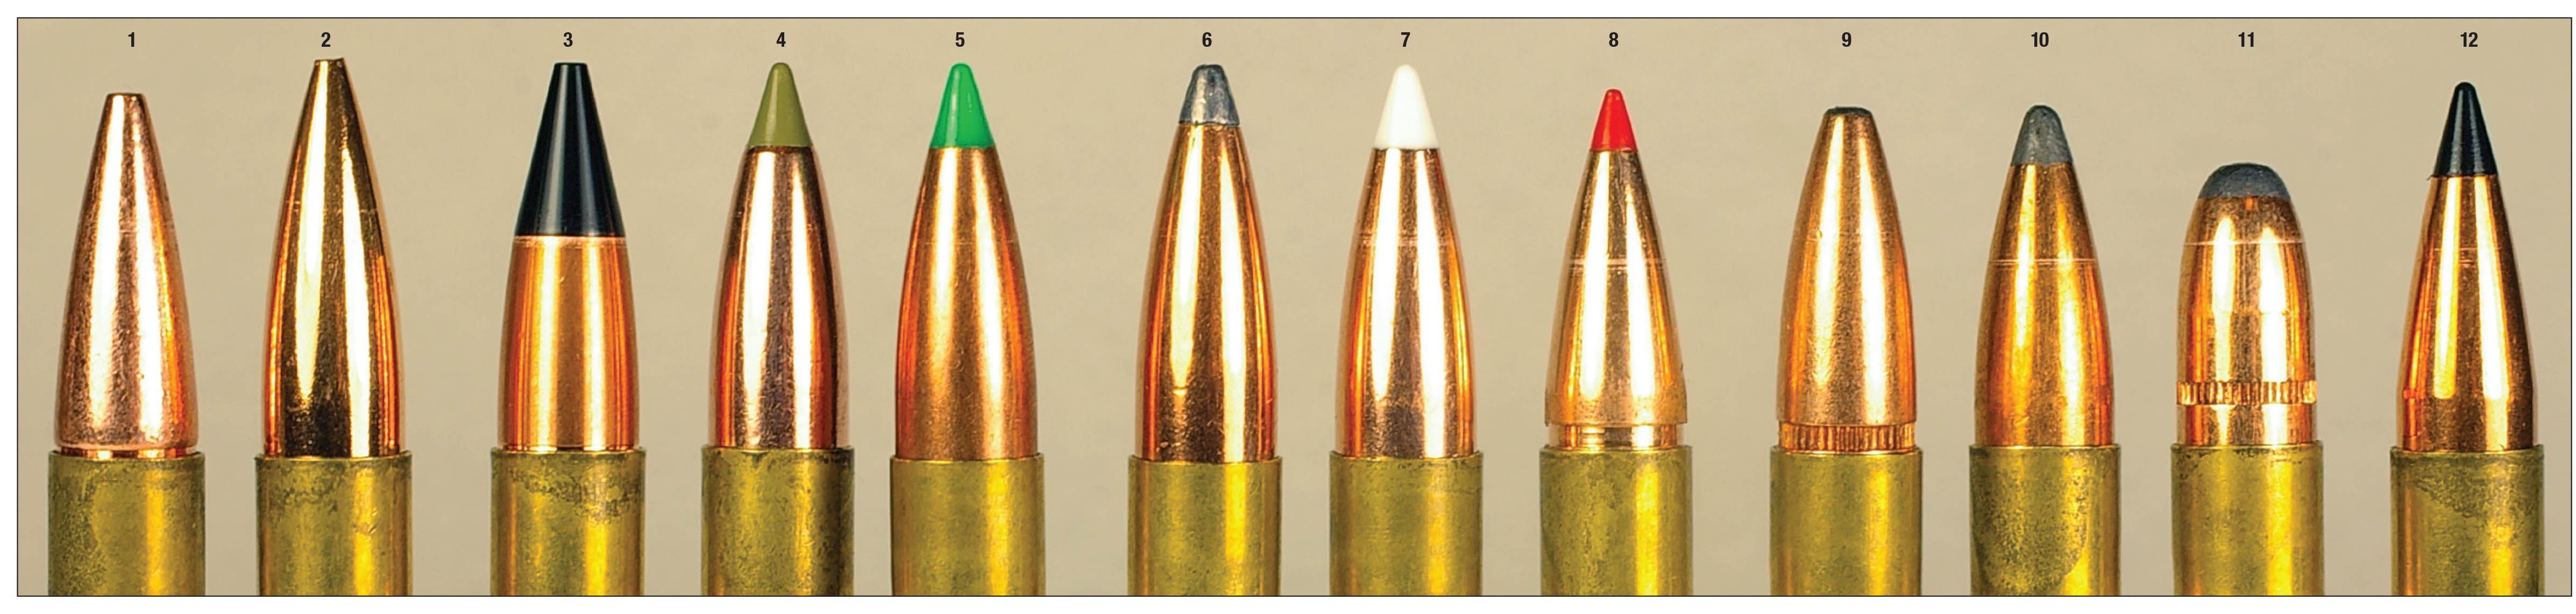 These 150-grain .30-caliber bullets include: a (1) Barnes TSX BT, (2) Berger FB Target, (3) Cutting Edge Copper Raptor, (4) Nosler E-Tip, (5) Nosler Ballistic Tip, (6) Nosler Partition, (7) Nosler AccuBond, (8) Hornady GMX, (9) Remington Core- Lokt, (10) Sierra GameKing spitzer BT, (11) Sierra Pro-Hunter roundnose and a (12) Swift Scirocco II. Different seating depths may be required due to a bullet’s shape.